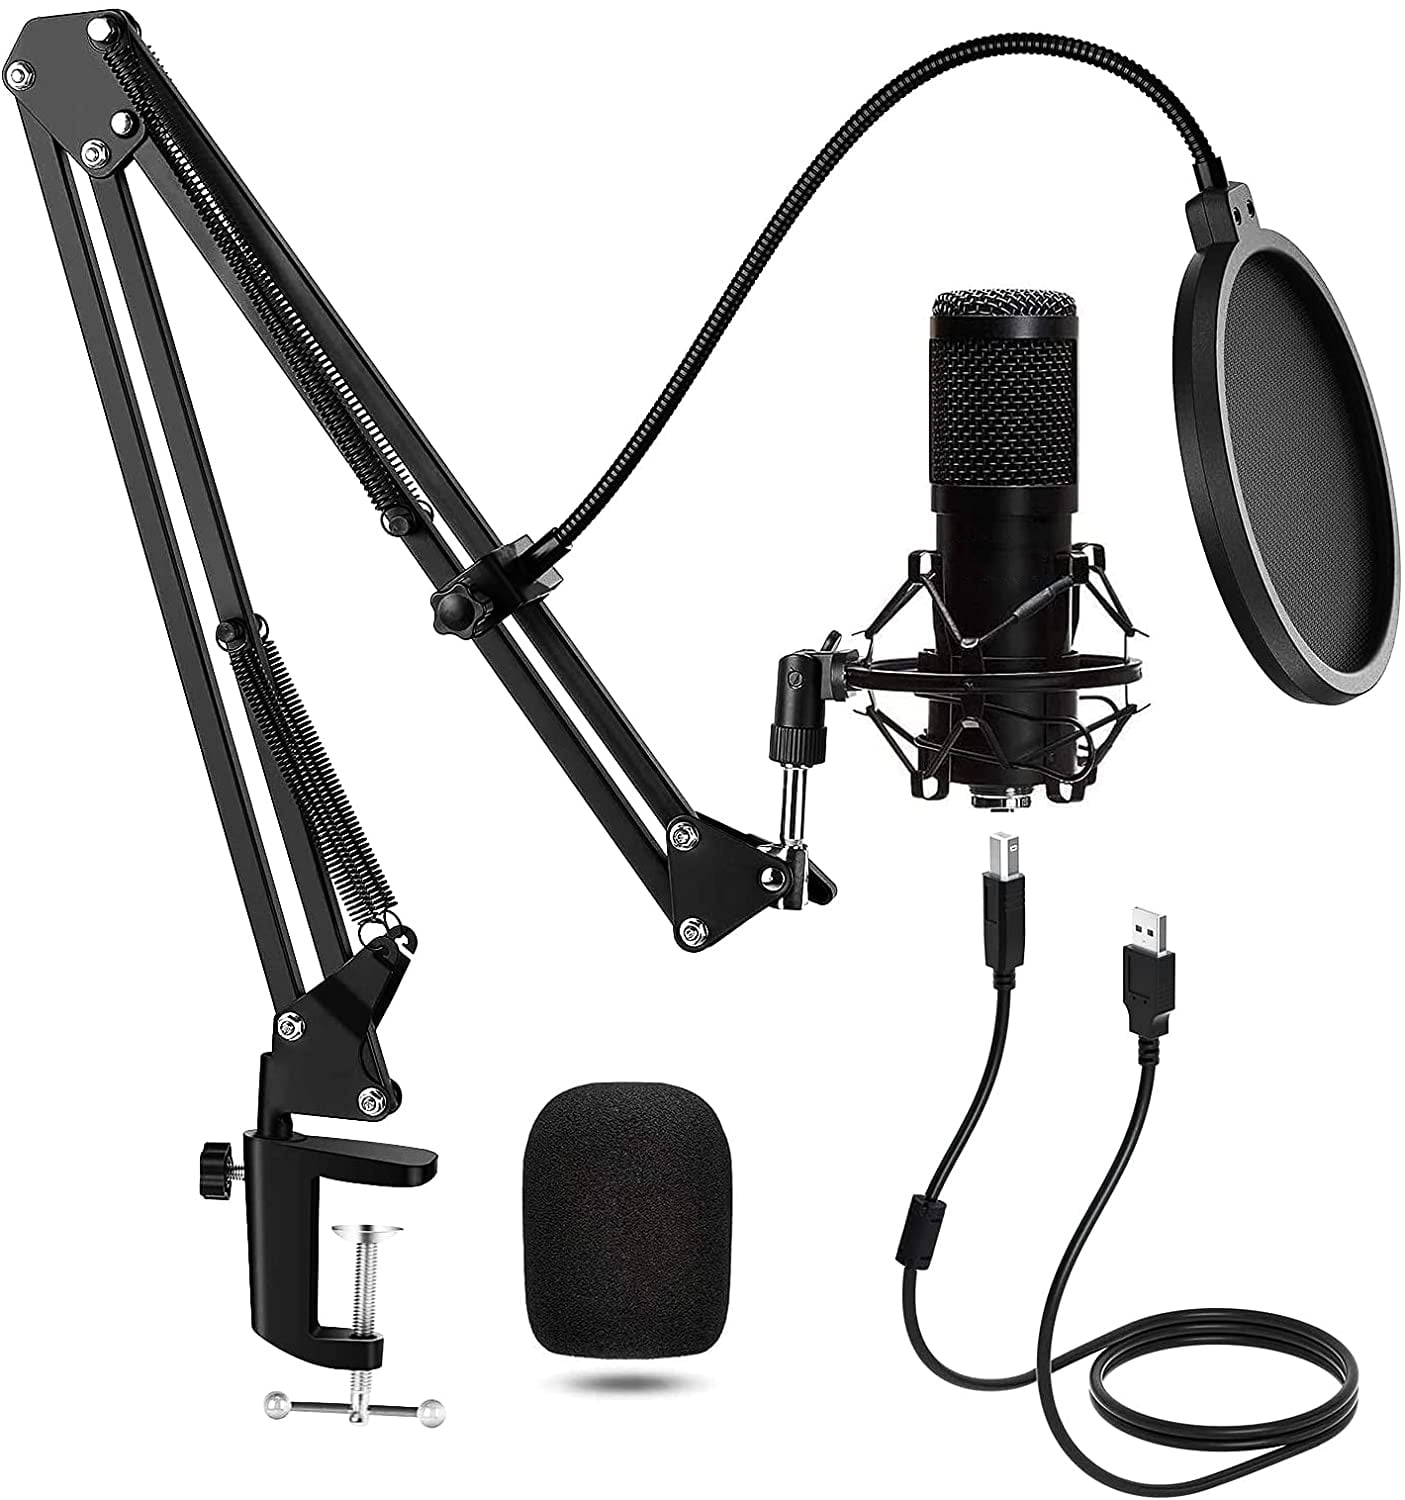 USB Streaming Podcast PC Microphone Computer Cardioid Condenser Microphones Kit with Boom Arm for Vocal Instrument Recording Gaming YouTube Karaoke Studio Mic Compatible with Mac Laptop Desktop 